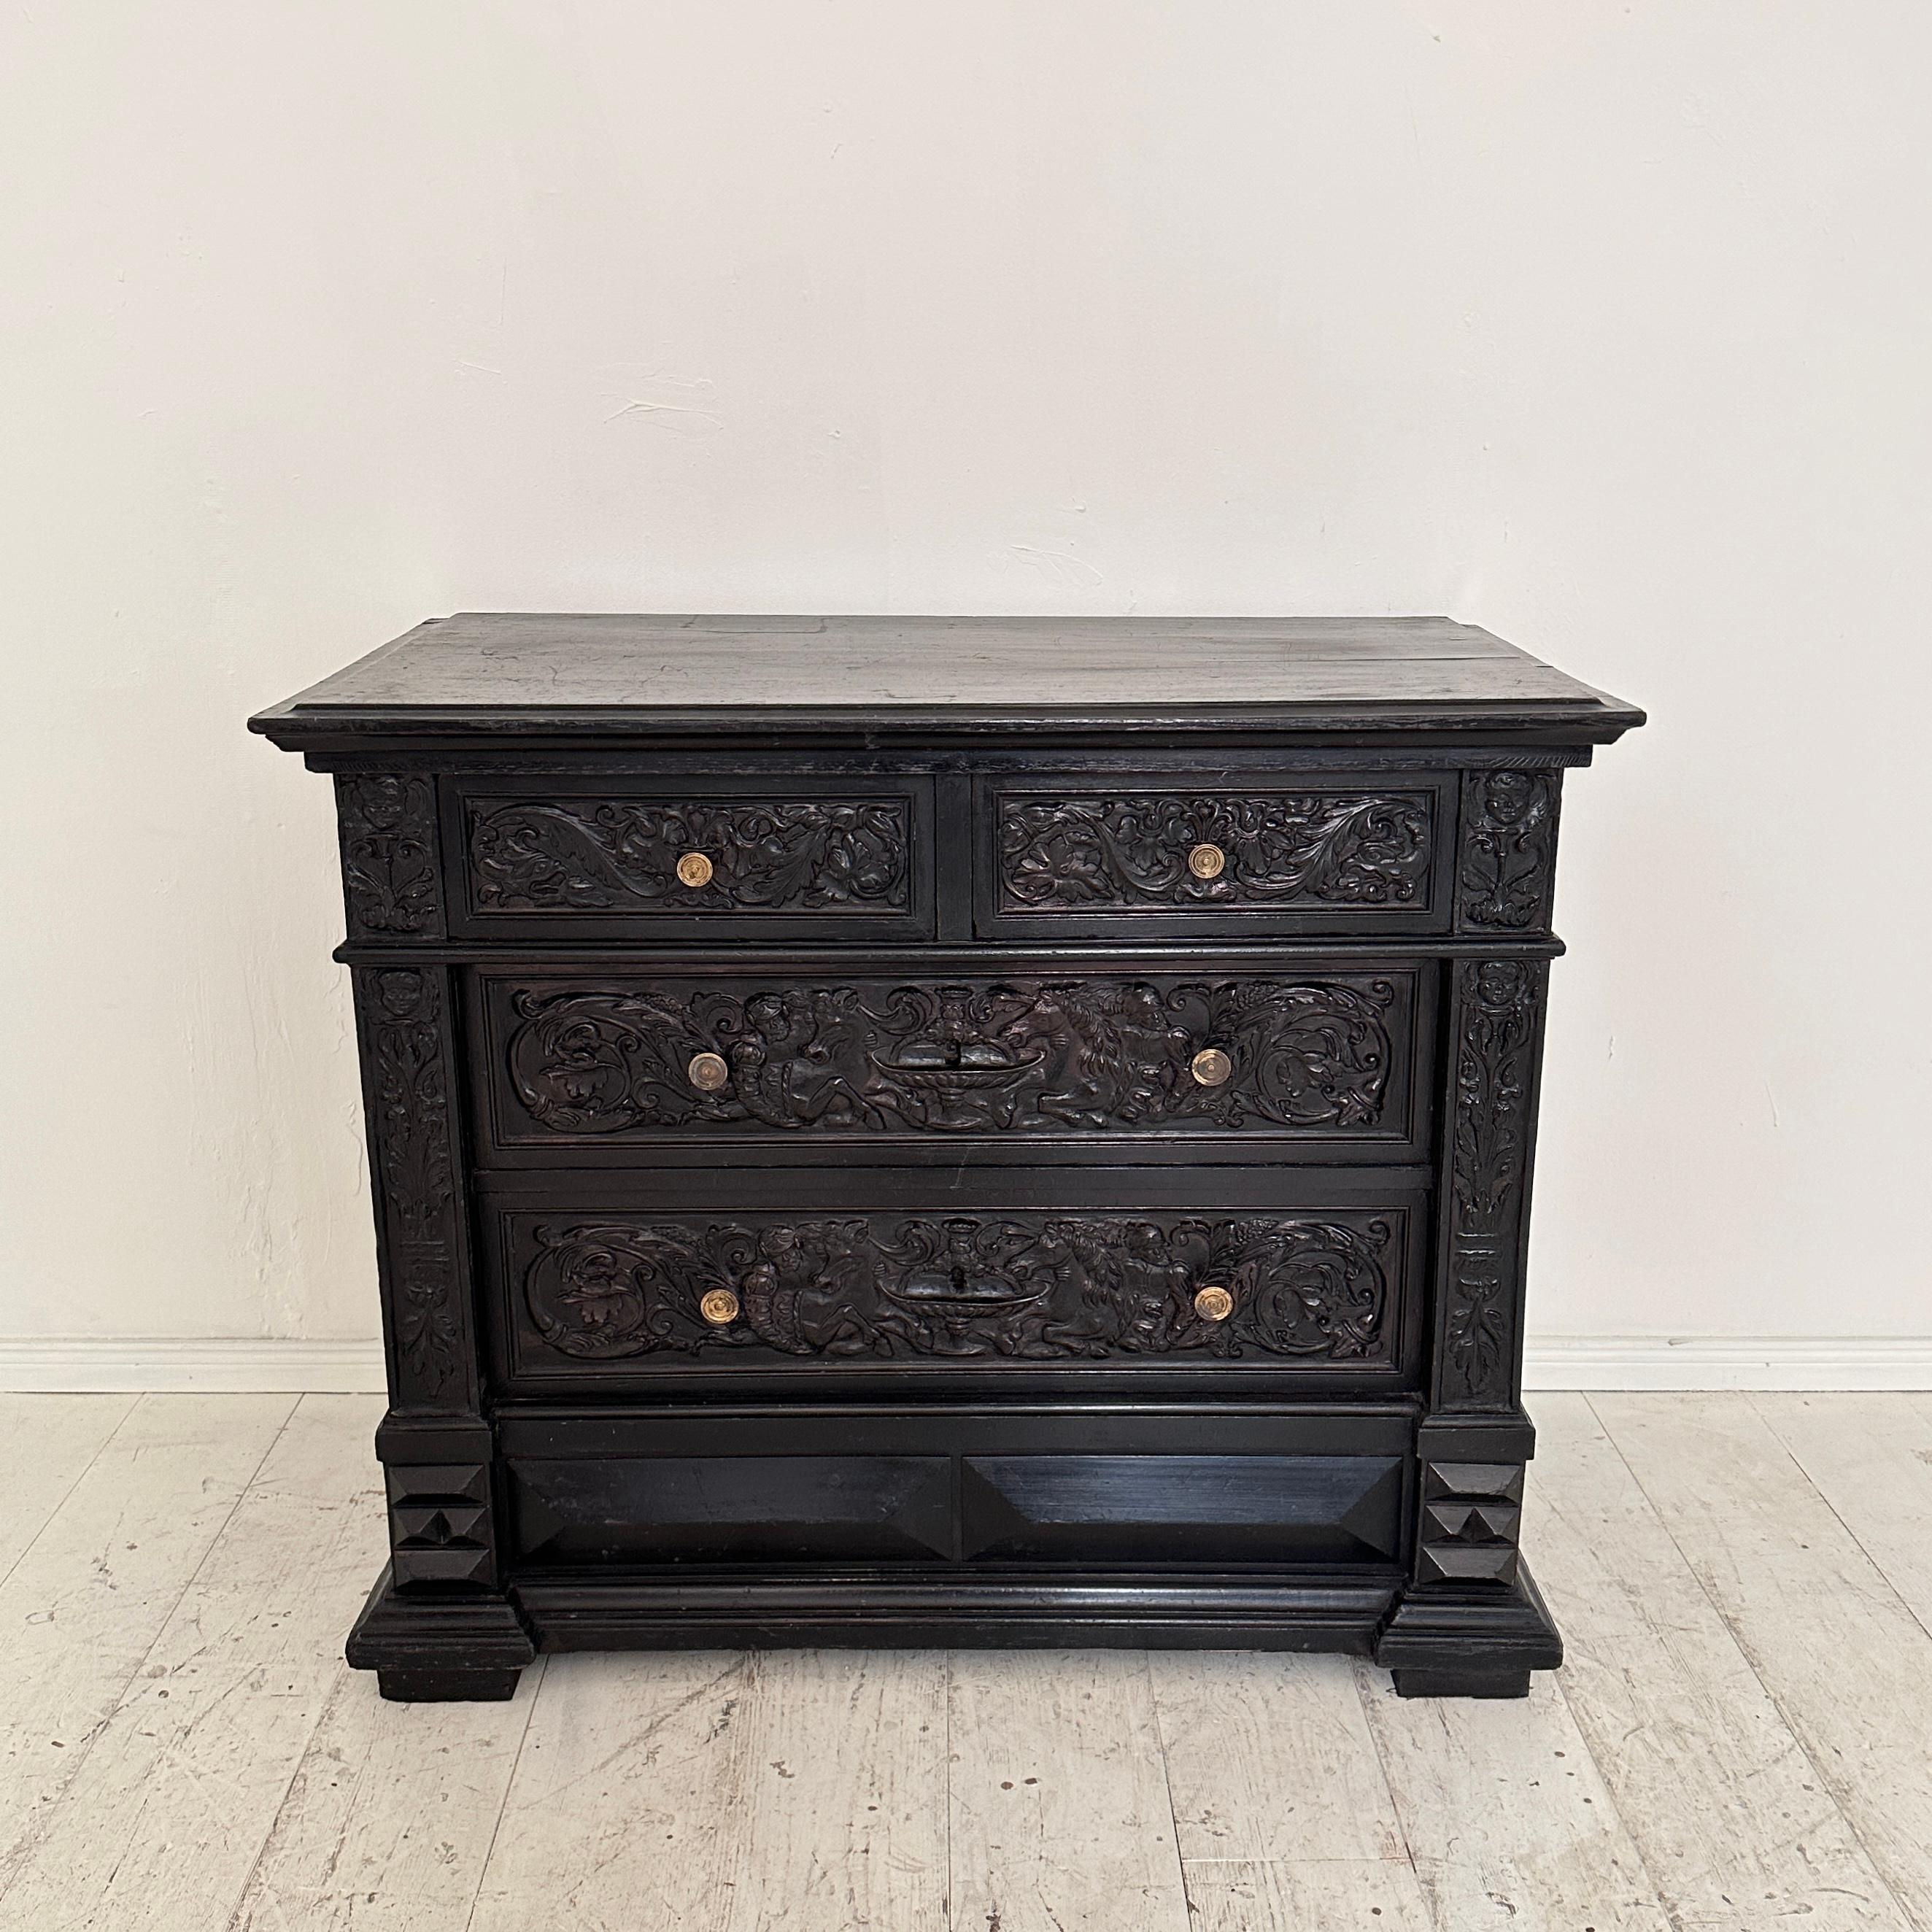 19th Century German Renaissance-Style Chest of Drawers in Black, around 1880 For Sale 2